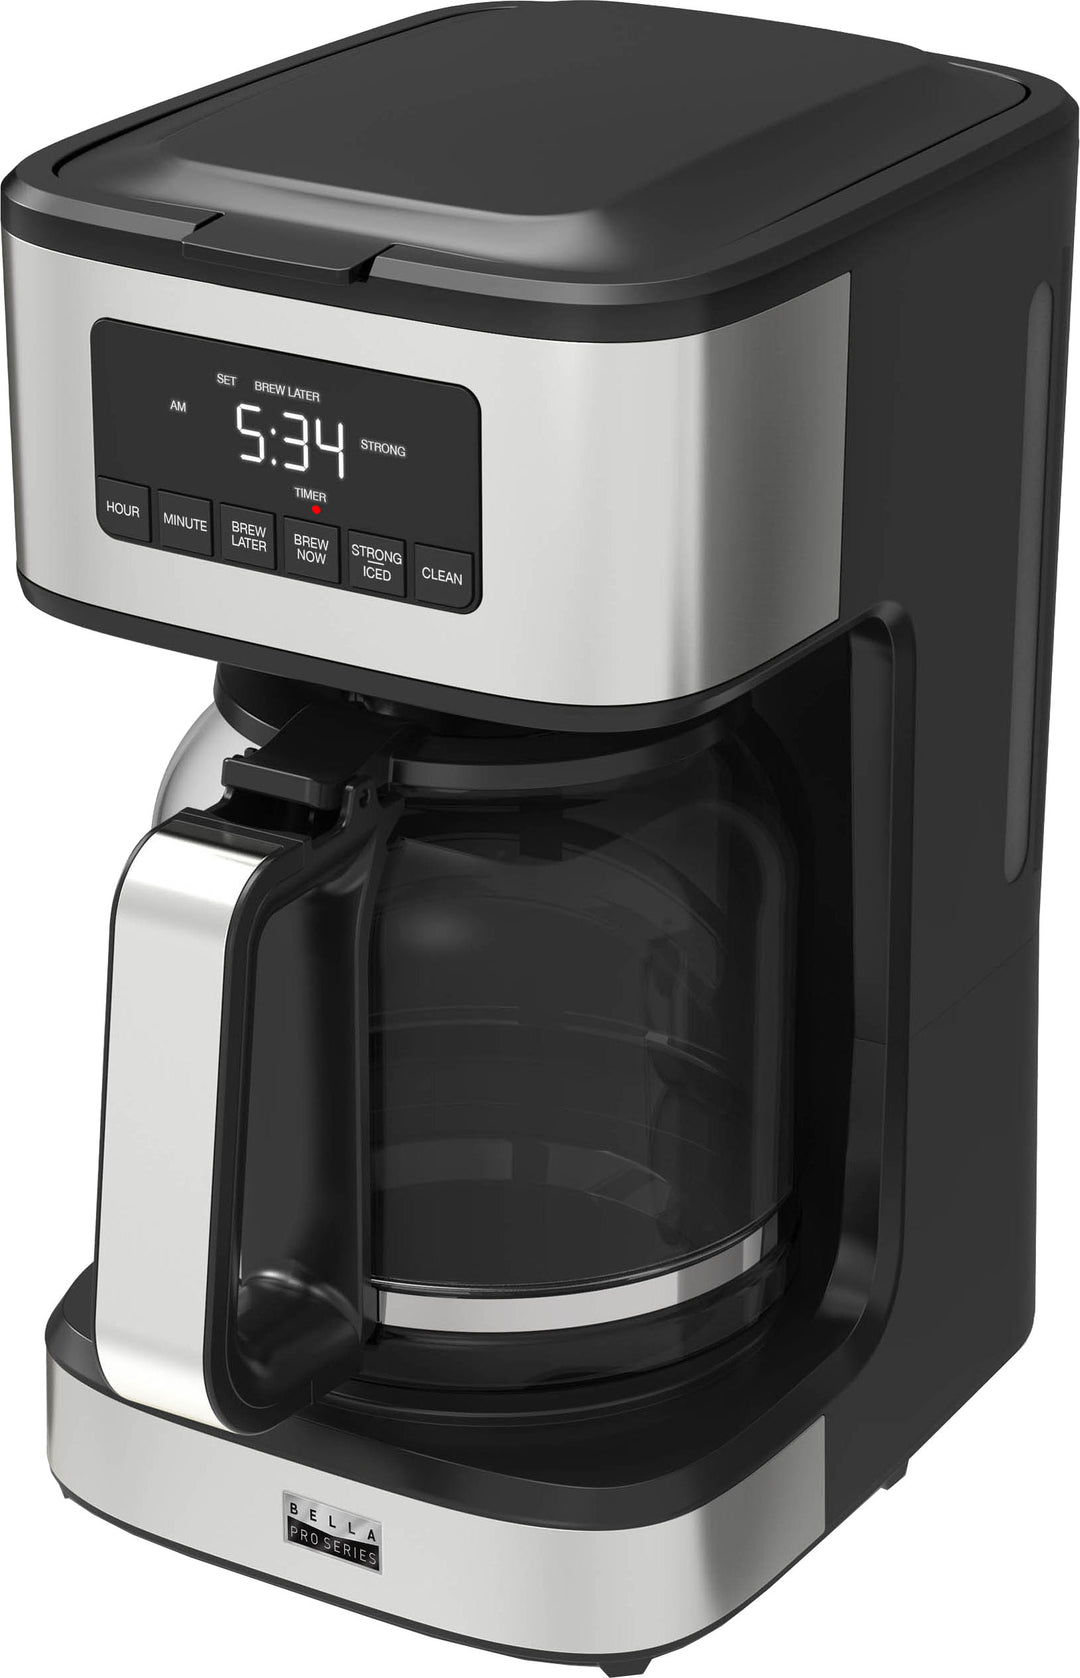 Bella Pro Series - 12-Cup Programmable Coffee Maker - Stainless Steel_2